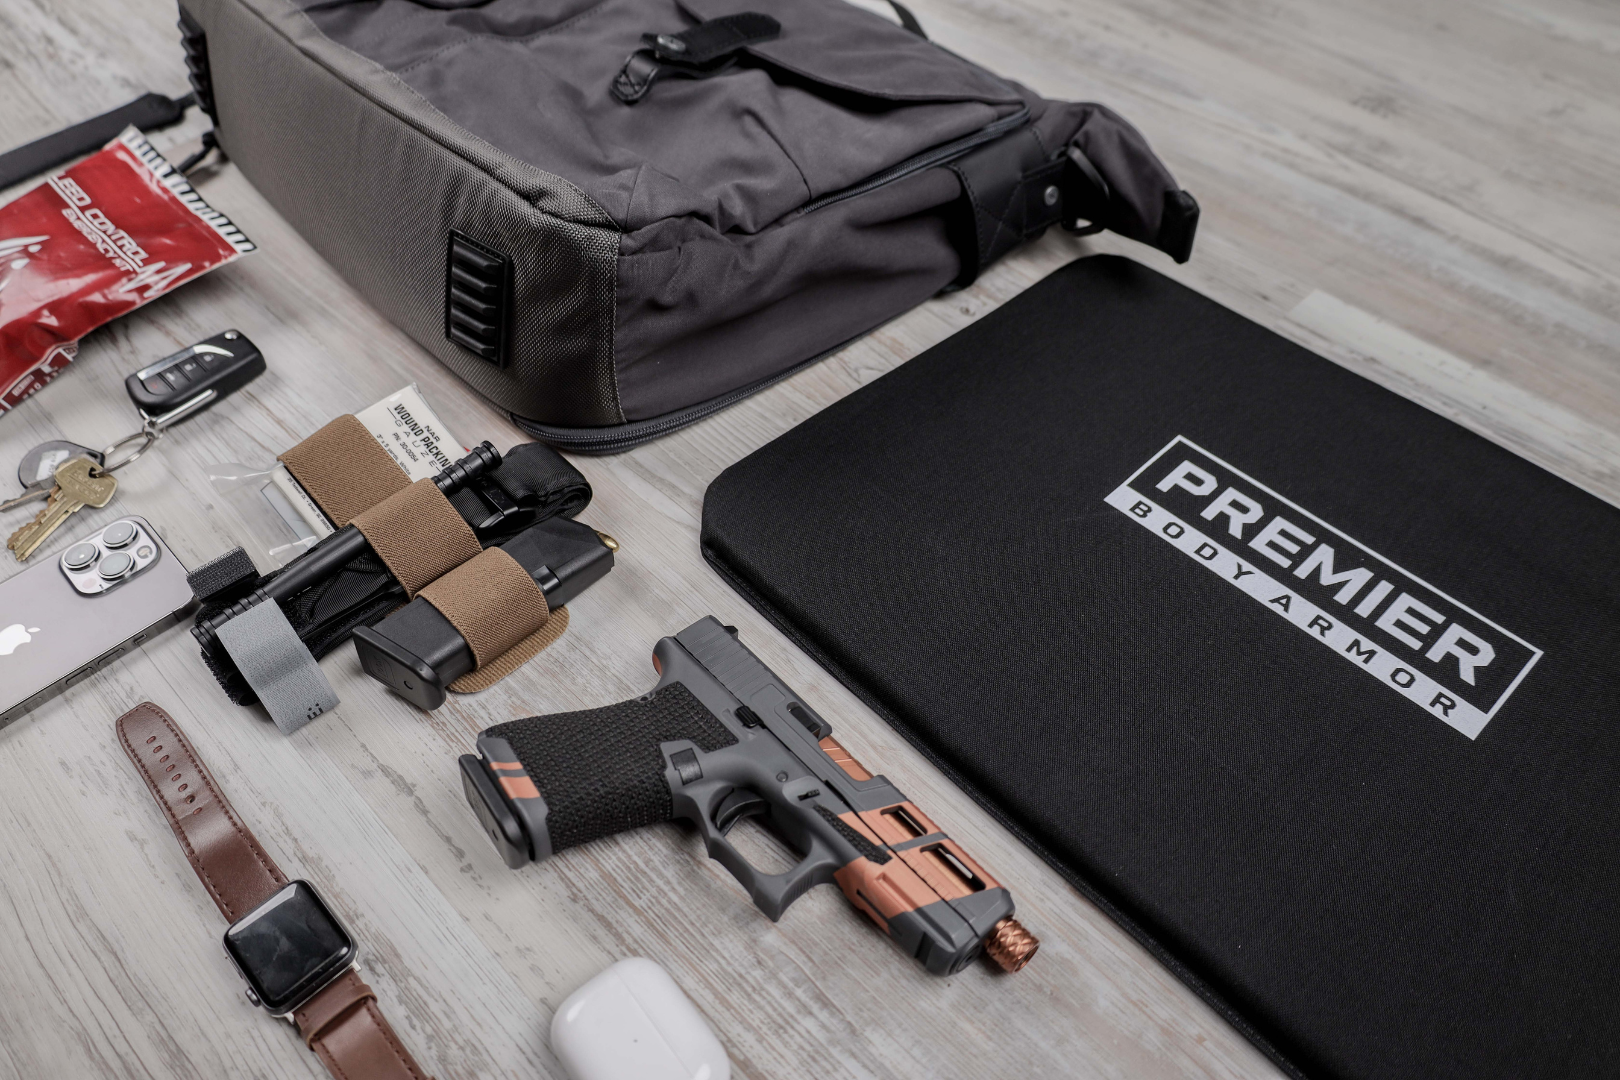 vertx bag loadout with bulletproof insert, extra mags, and everyday items